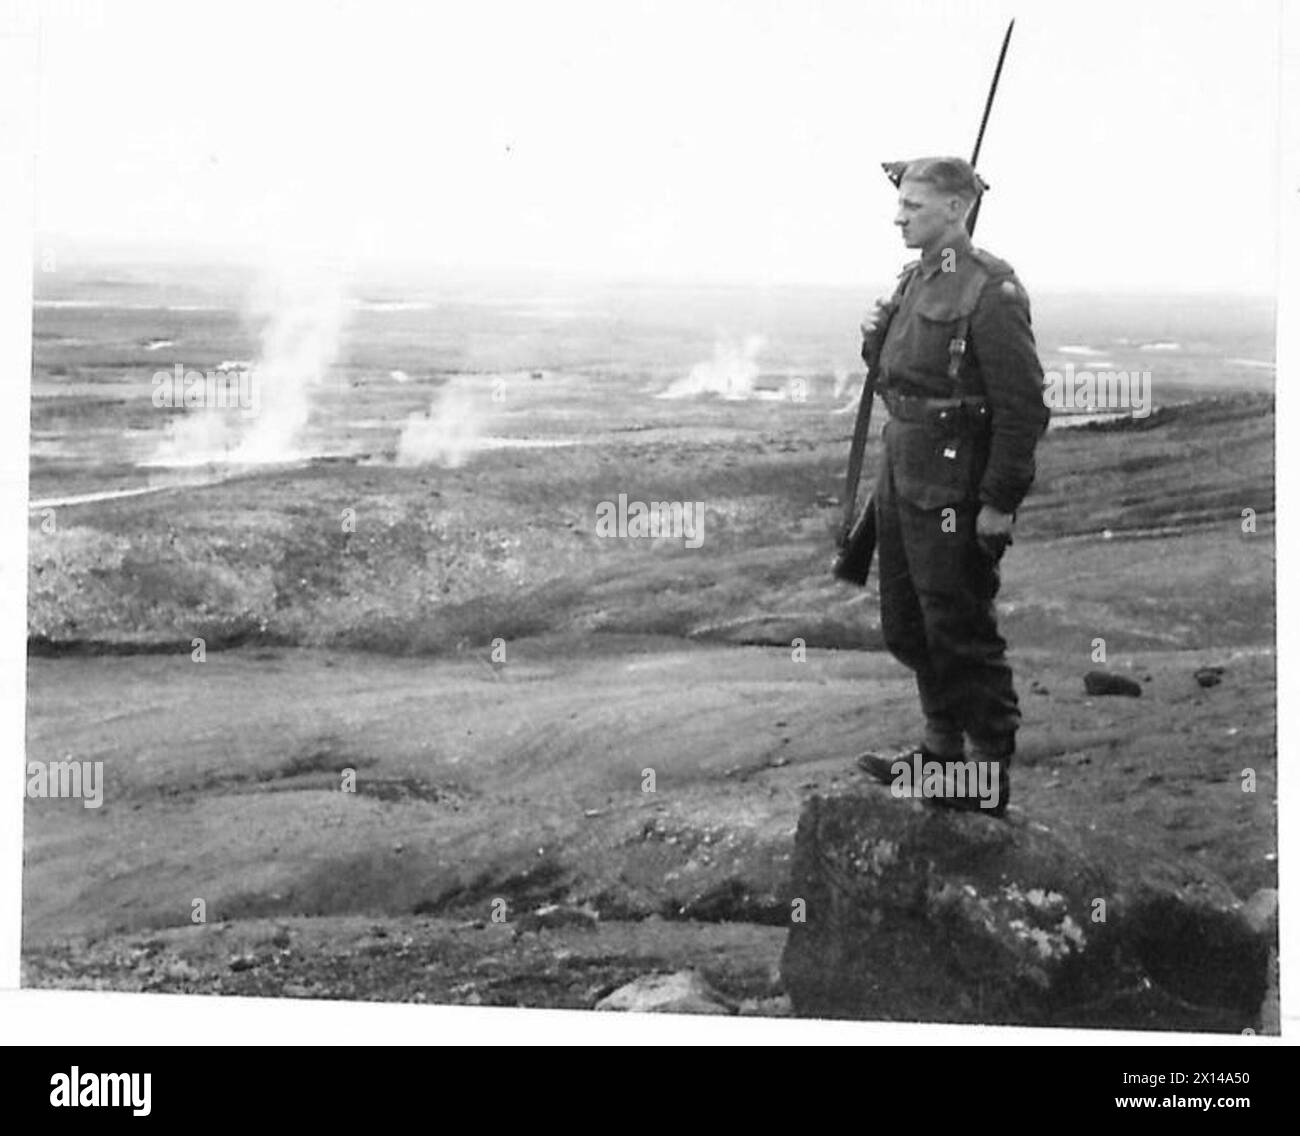 WITH THE BRITISH TROOPS IN ICELAND - A British solider on the lookout in a region of Iceland where there are many hot springs, some of which can be seen in the background, at Geysir British Army Stock Photo